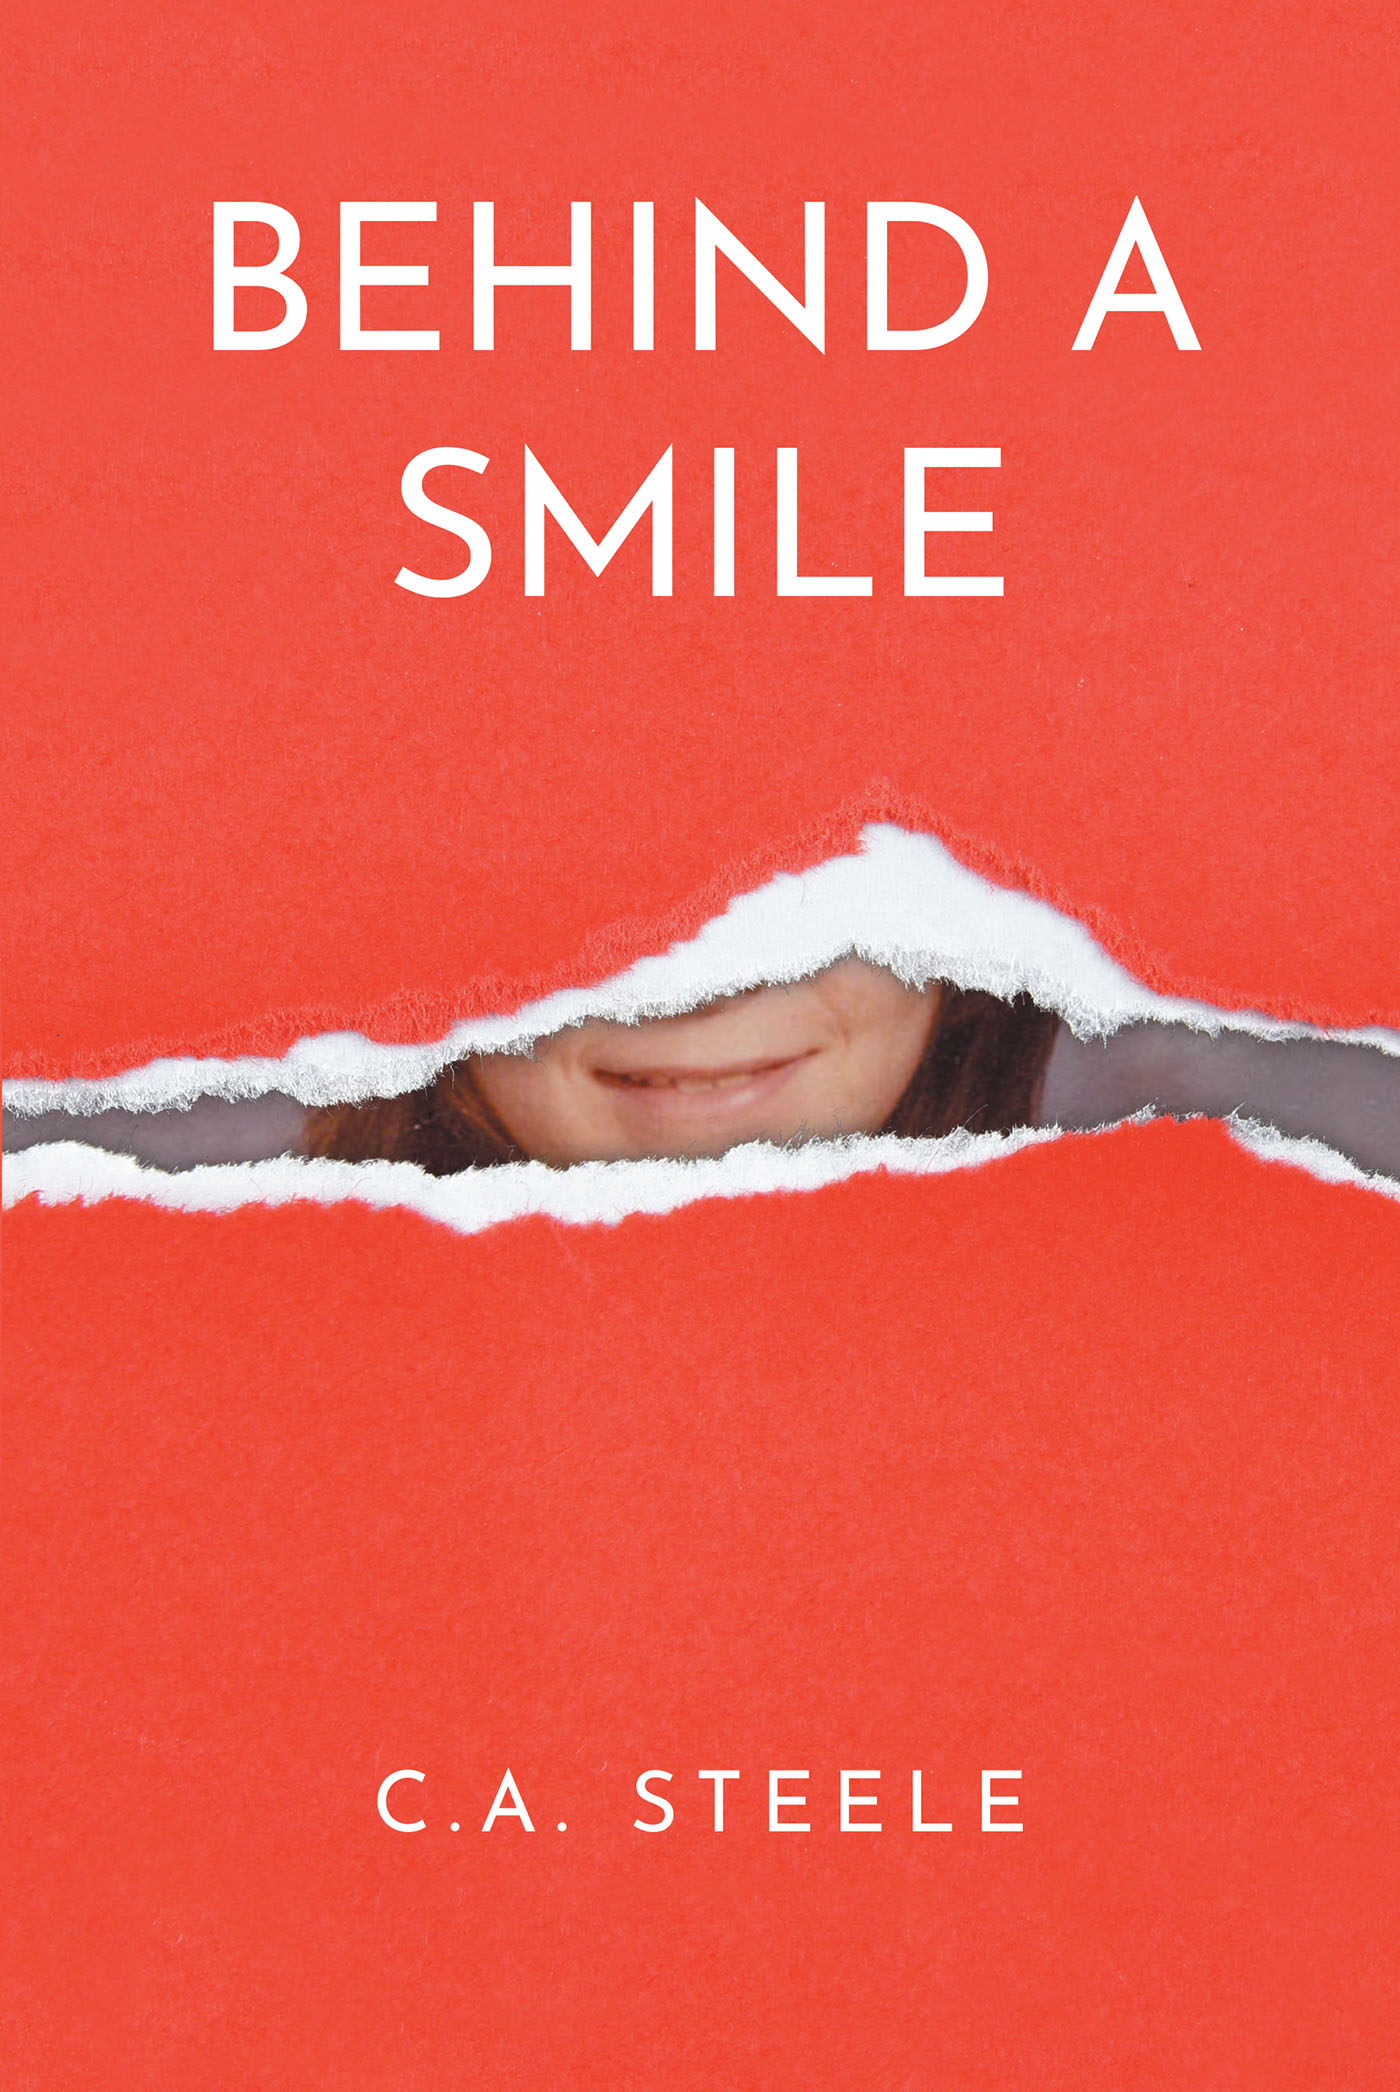 Author C.A. Steele’s New Book, “Behind a Smile,” is the Author’s Gripping Story of Survival That Spans the Author’s Entire Lifetime